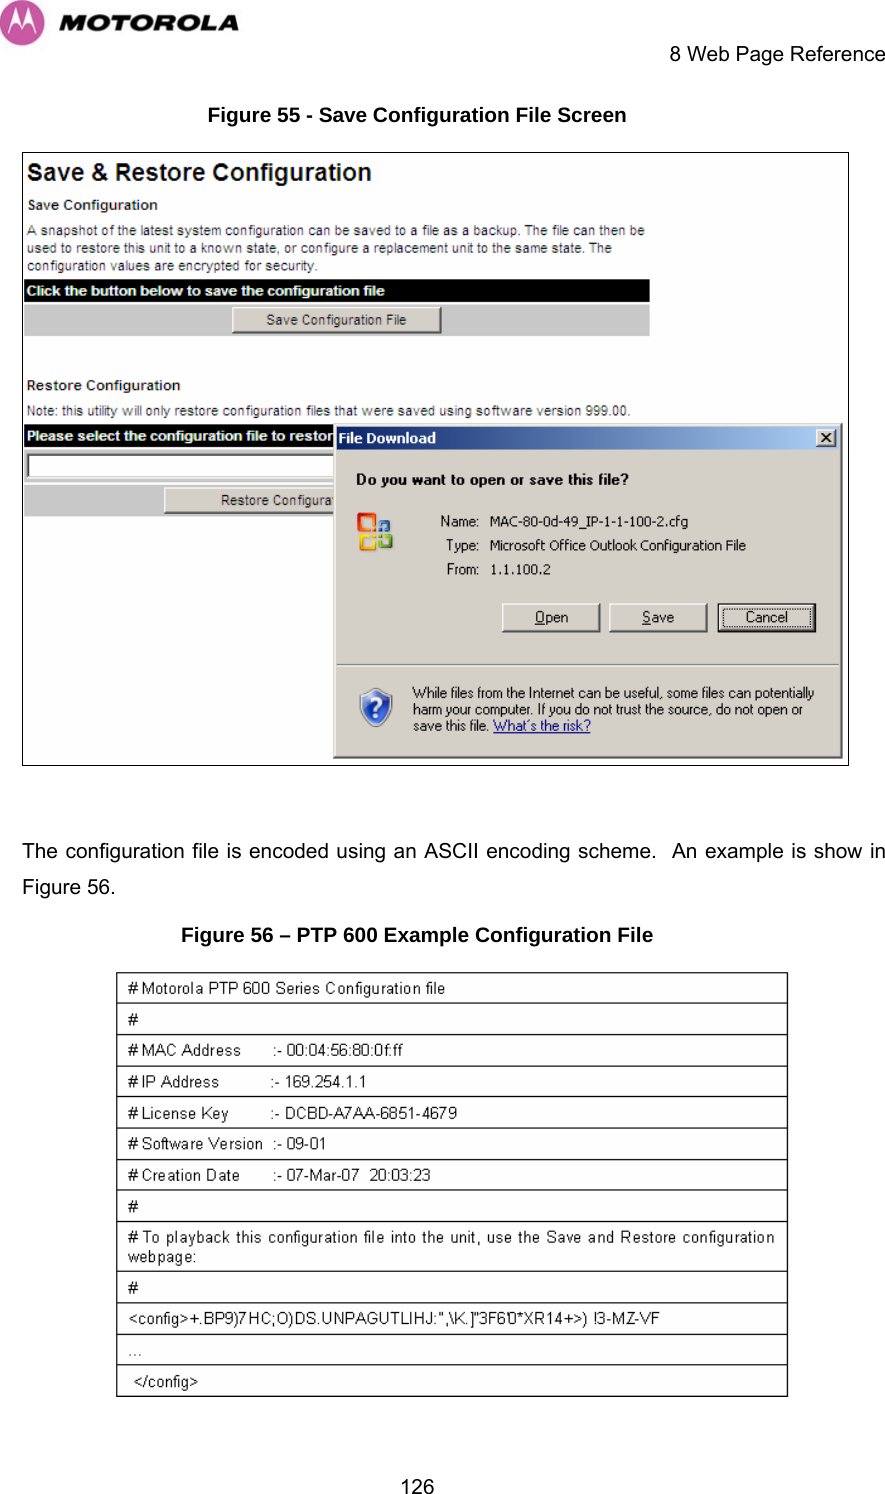     8 Web Page Reference  126Figure 55 - Save Configuration File Screen   The configuration file is encoded using an ASCII encoding scheme.  An example is show in 1Figure 56. Figure 56 – PTP 600 Example Configuration File  